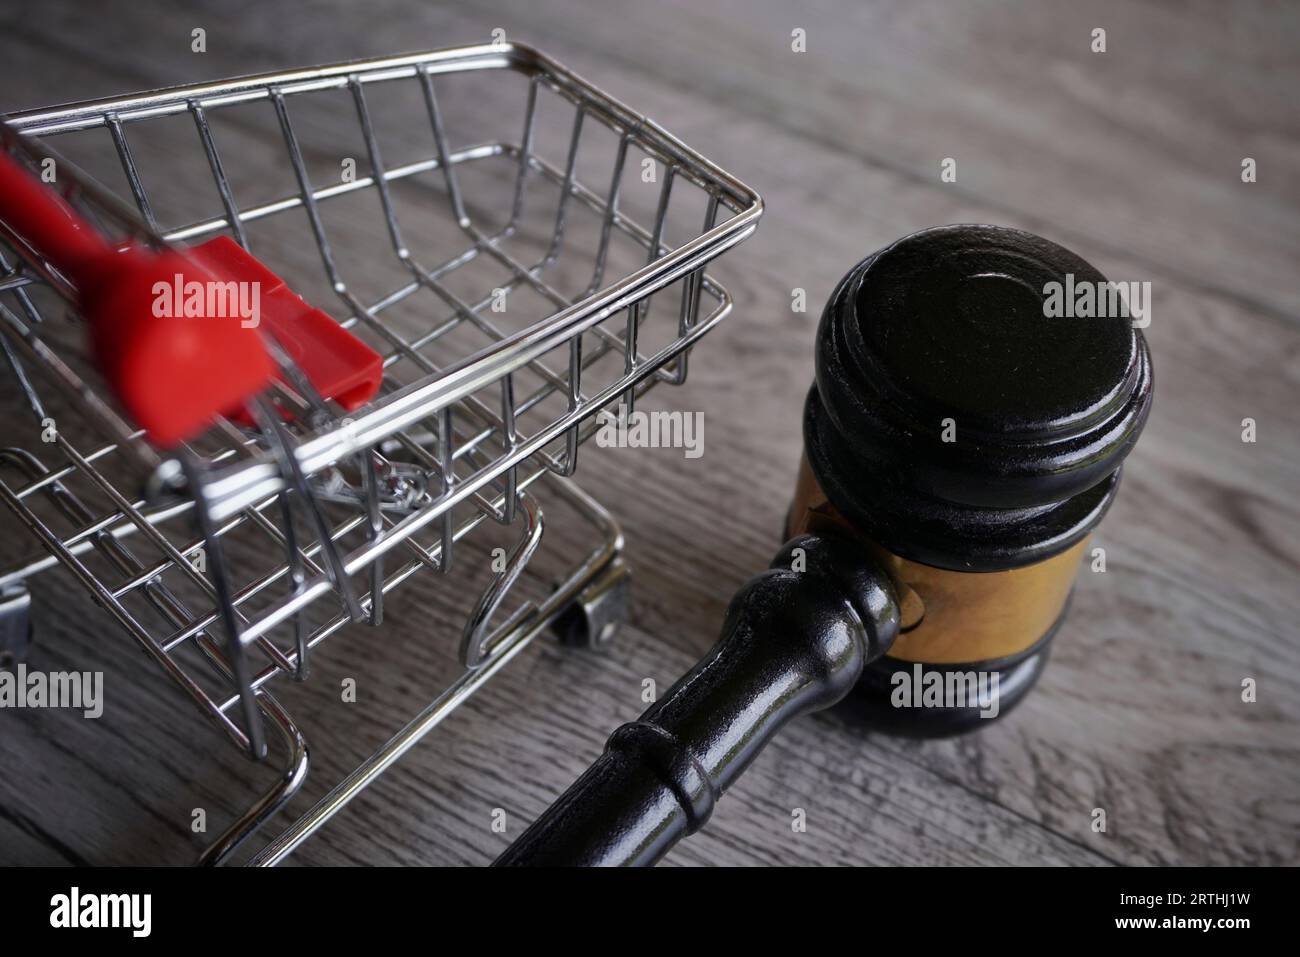 Closeup image of judge gavel and shopping trolley on table. Consumer rights, customer protection, commercial law concept Stock Photo